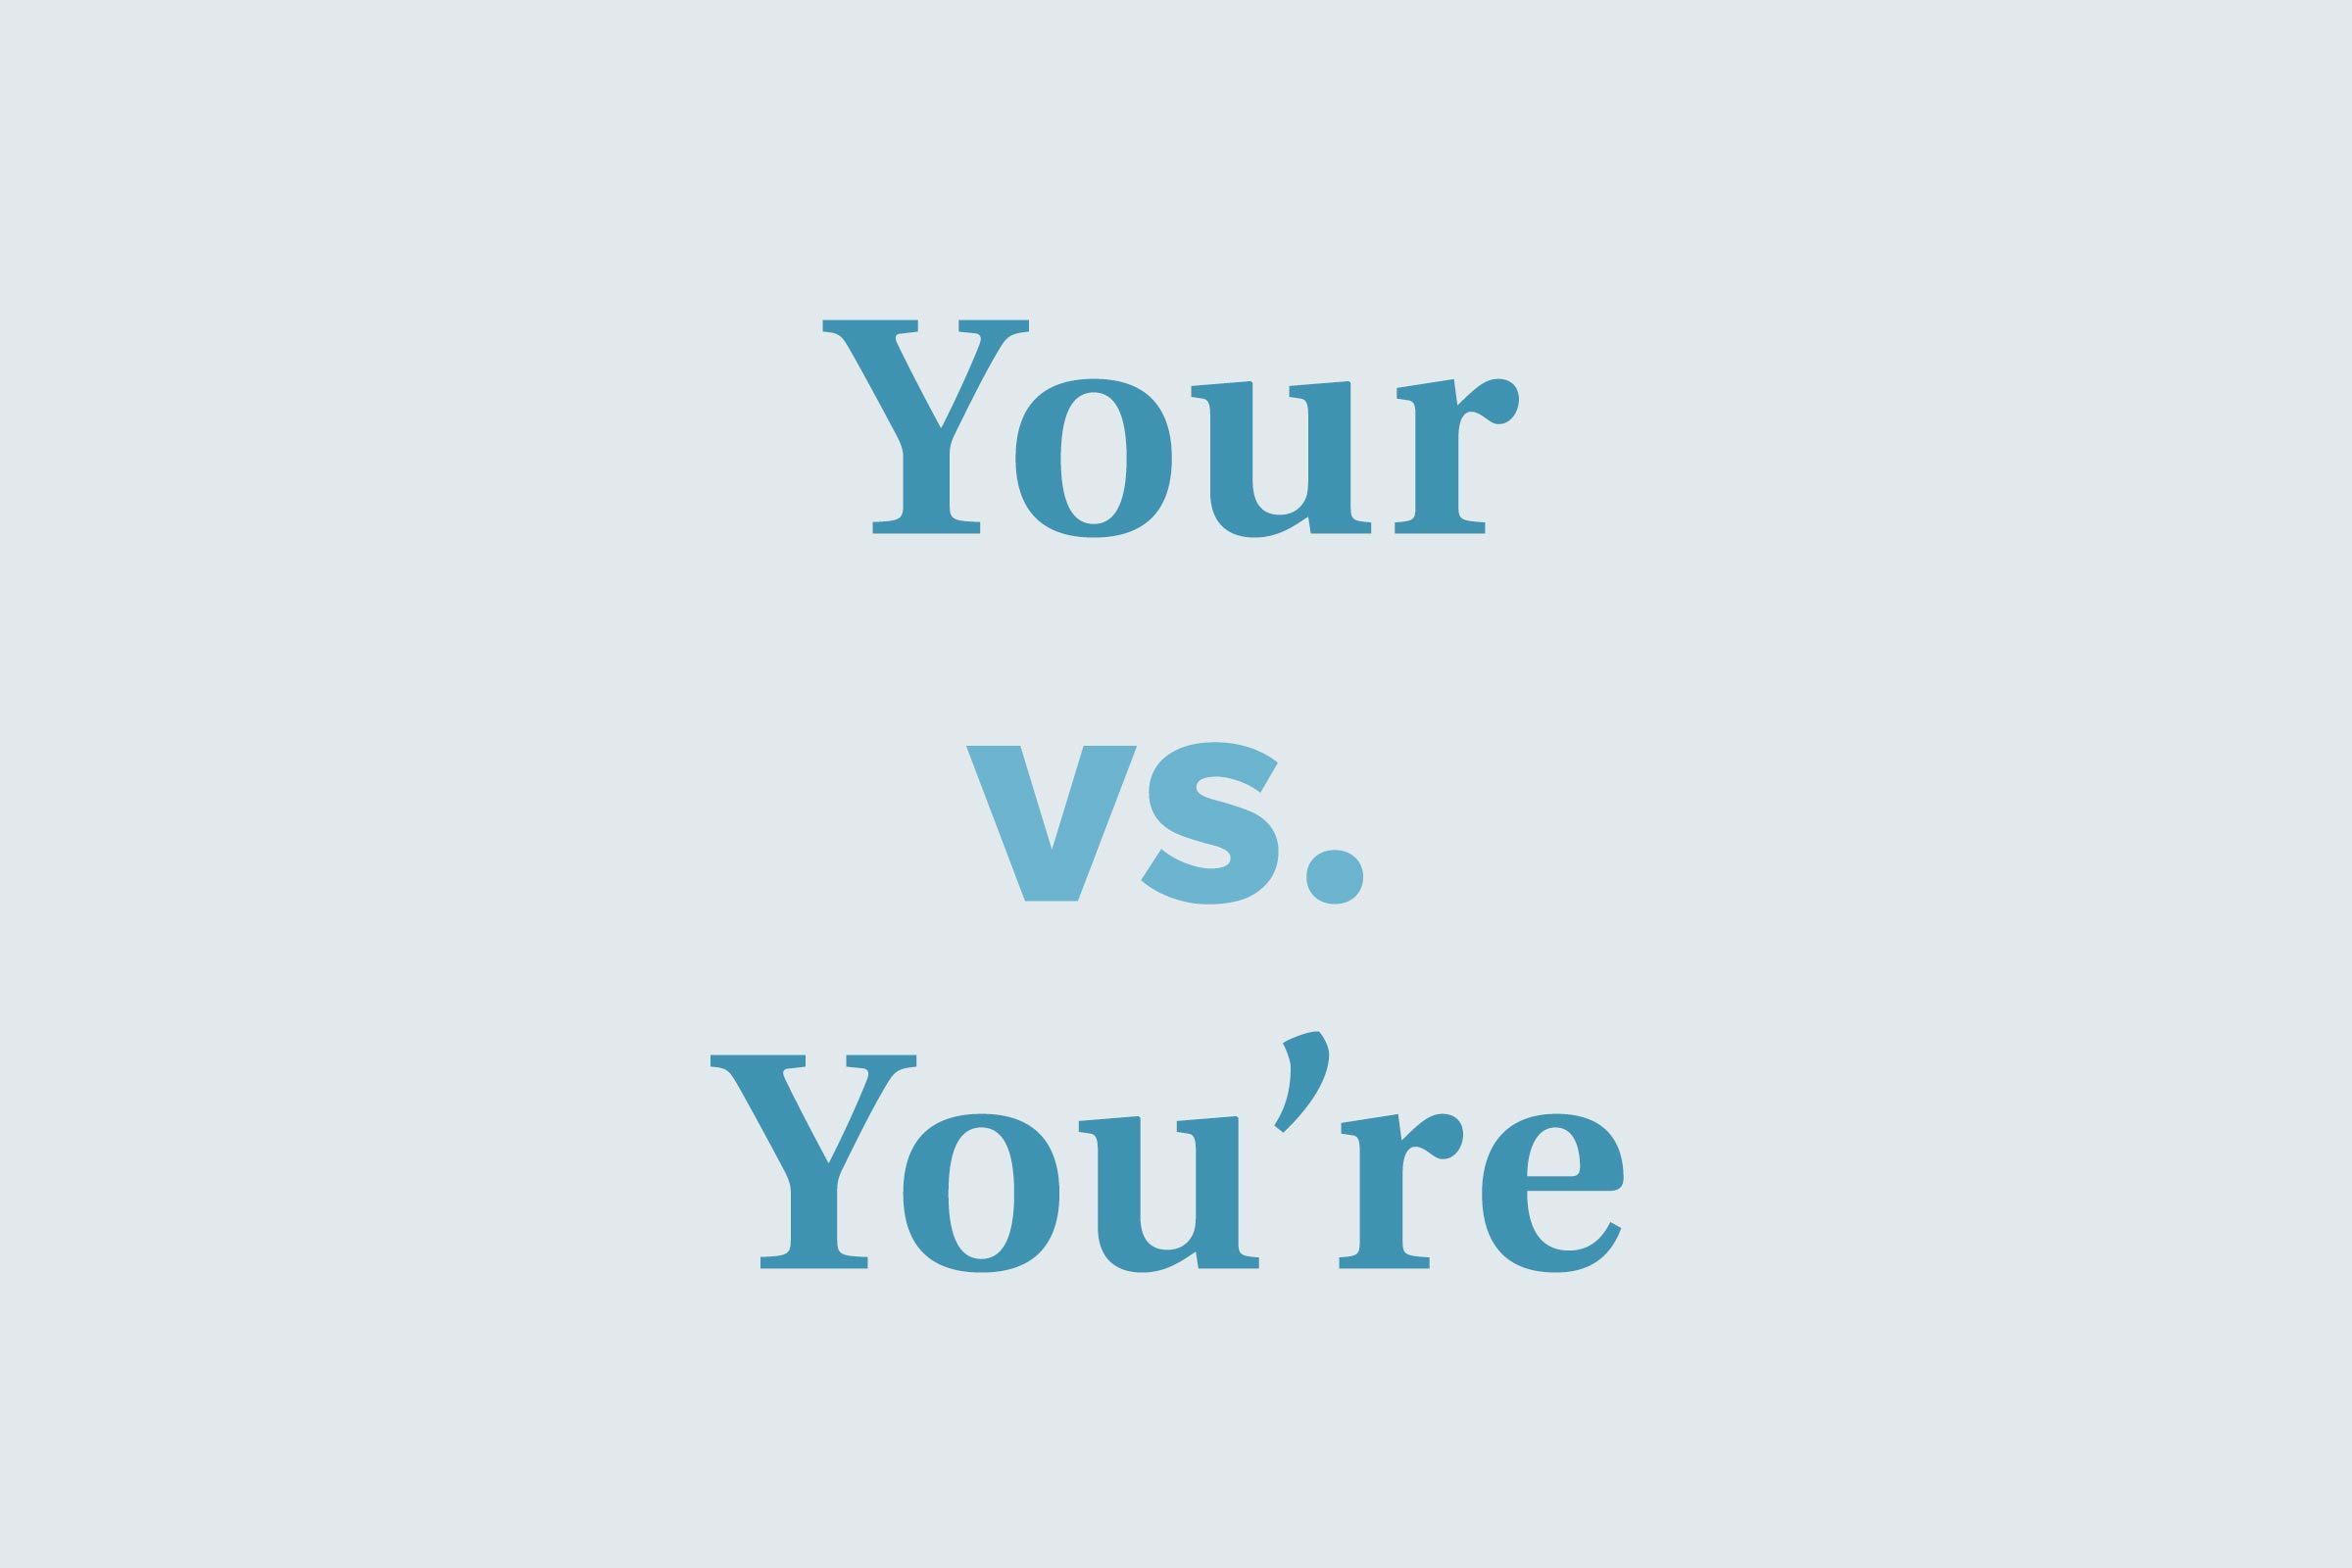 Your vs. you're